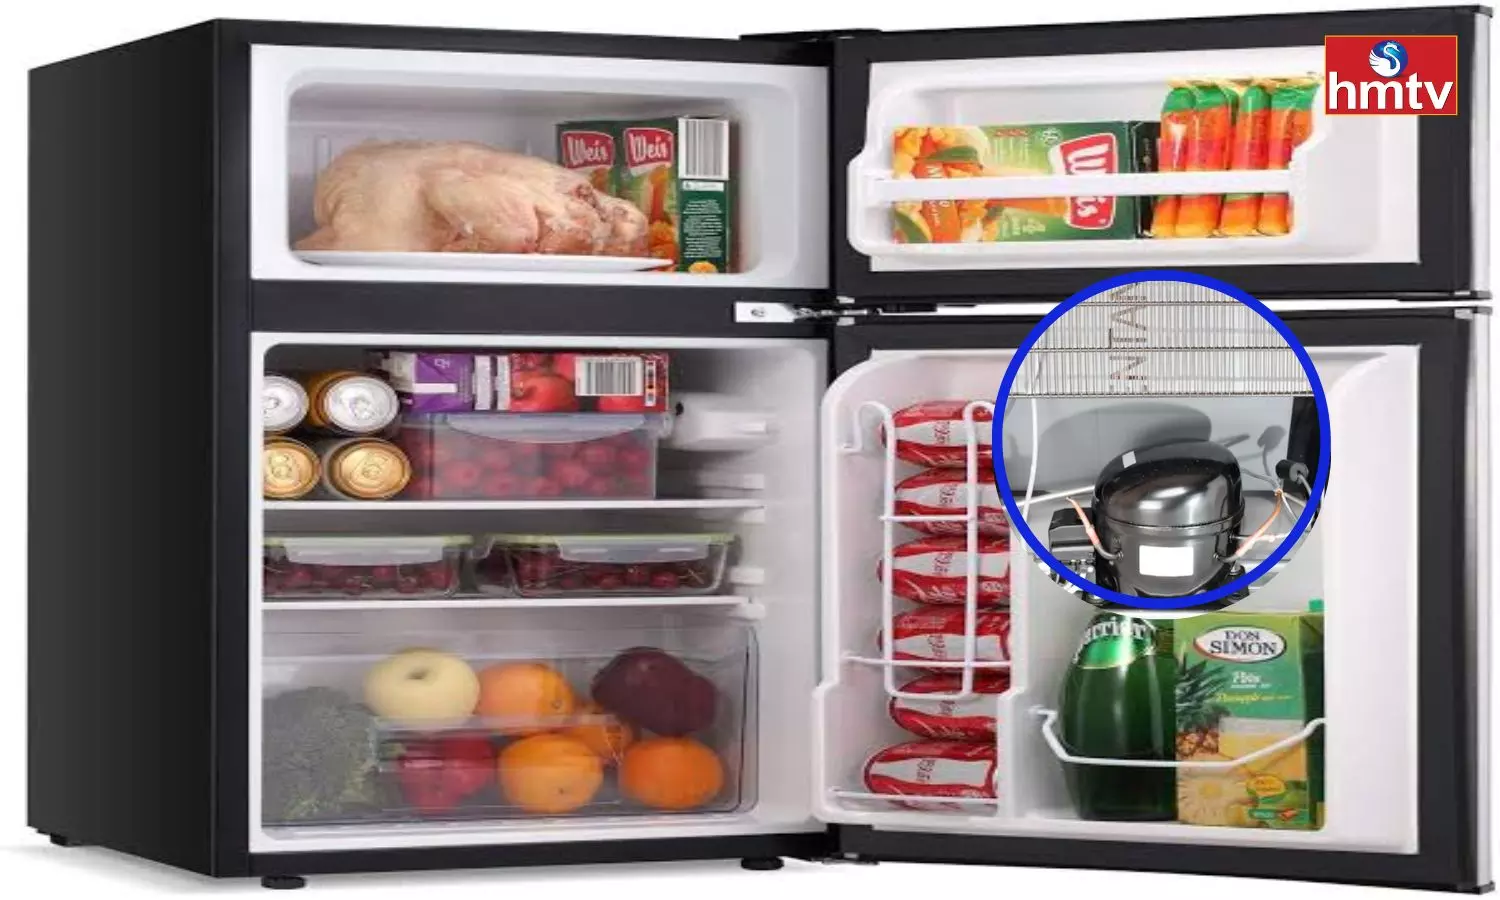 Small Mistake There is a Chance That Refrigerator Will Explode Like a Bomb Follow These Tips for Safe Zone